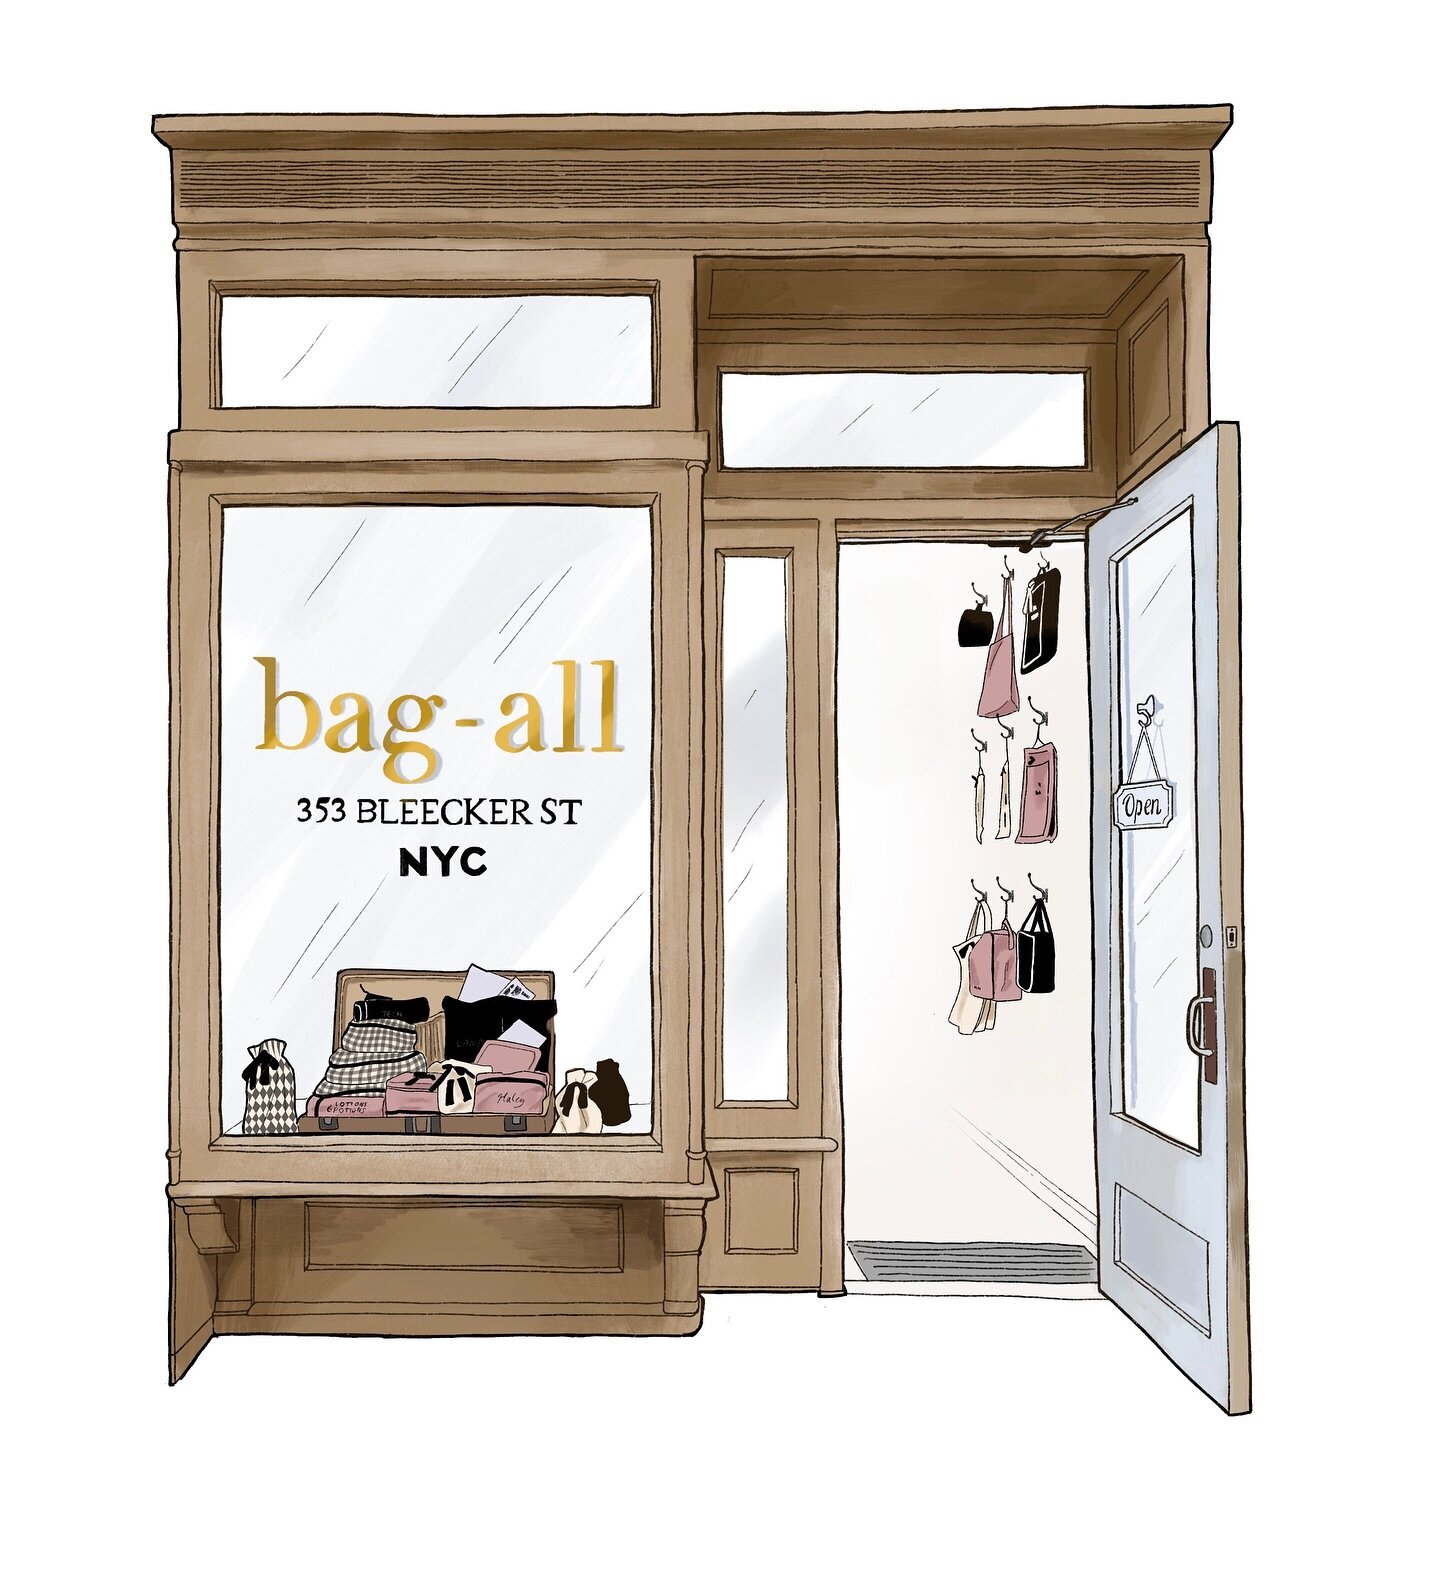 Transporting you to the heart of Bag-all&rsquo;s New York store at 353 Bleecker Street in Manhattan, drawn by the incredibly talented Caprice @cappidoodless 🎨✨

@bagalleurope @bagallfrance 

#bagall #organizingtips #manhattan #bleeckerstreet #giftsh